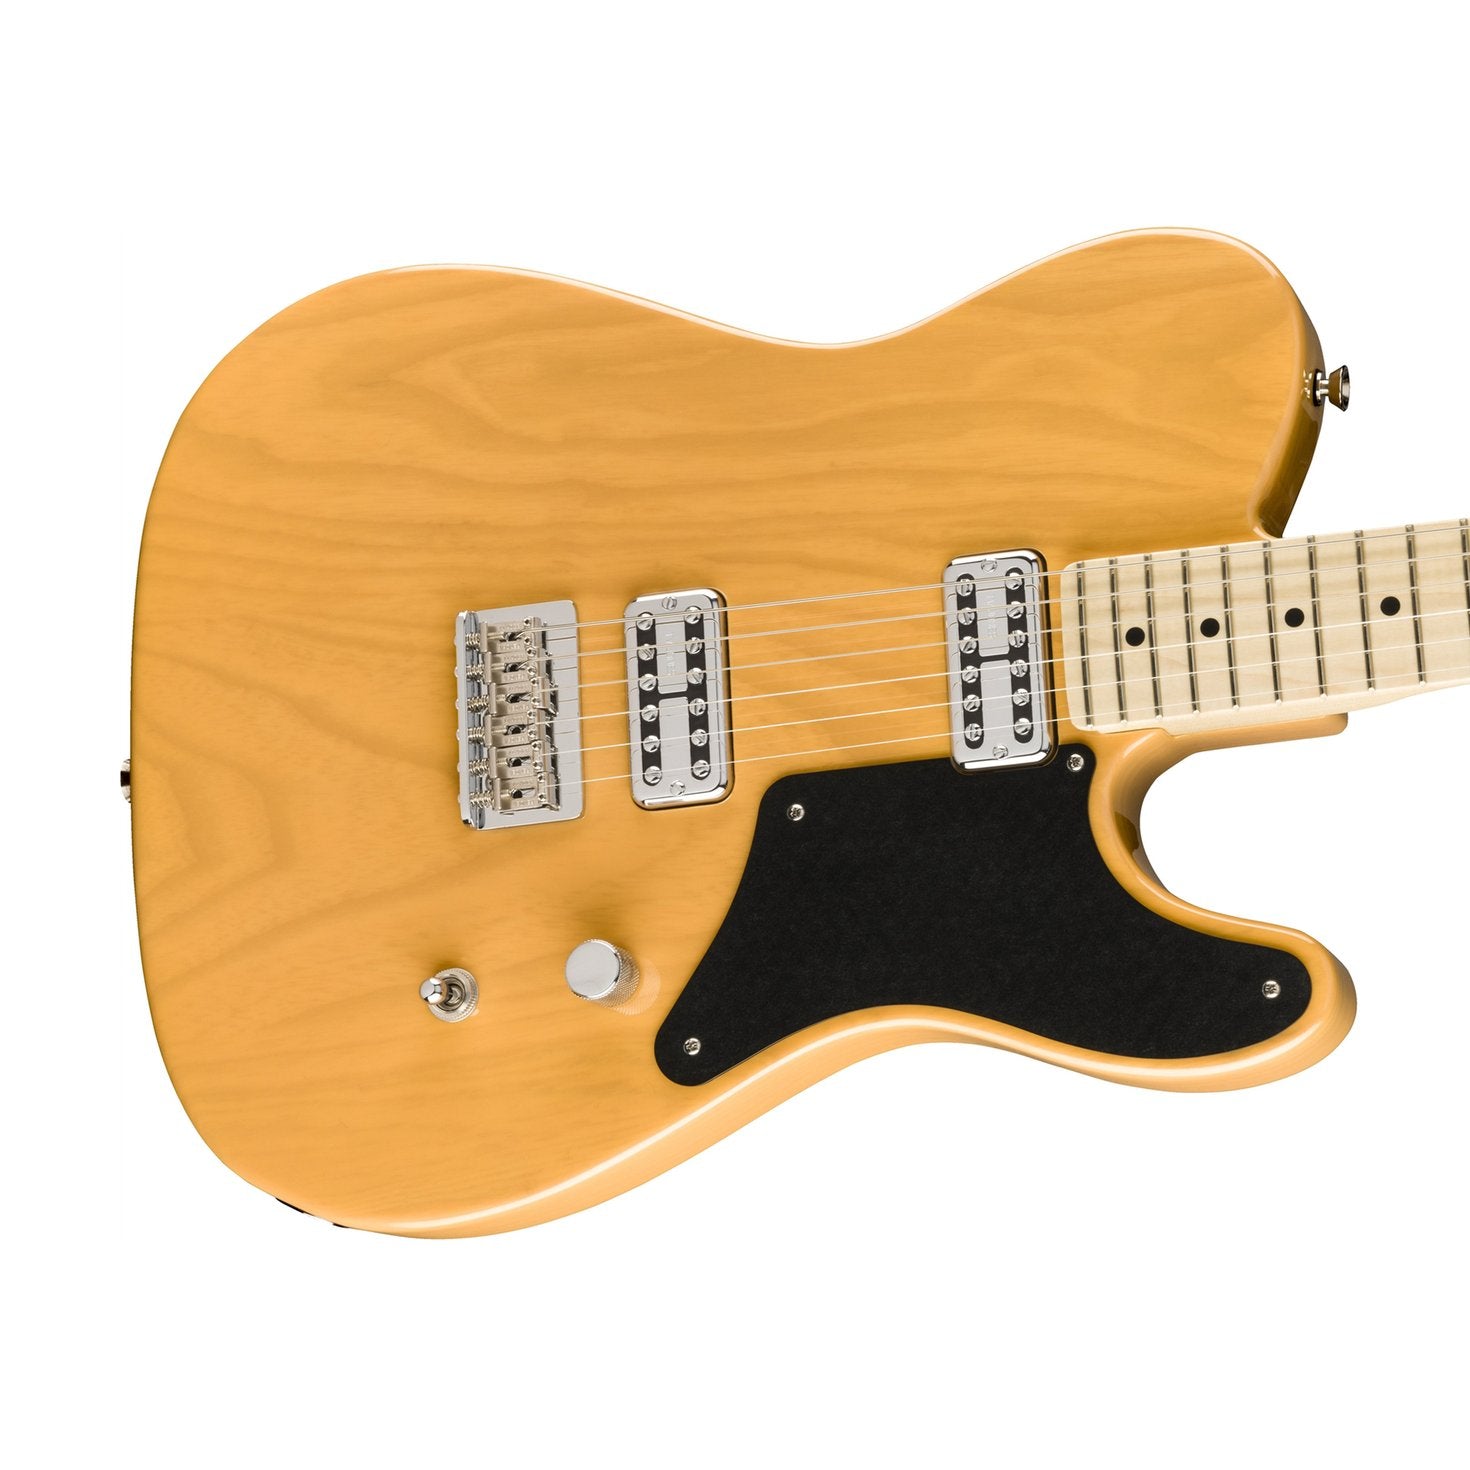 Fender Limited Edition Cabornita Telecaster Electric Guitar, Maple FB, Butterscotch Blonde, FENDER, ELECTRIC GUITAR, fender-electric-guitar-f03-017-0148-750, ZOSO MUSIC SDN BHD